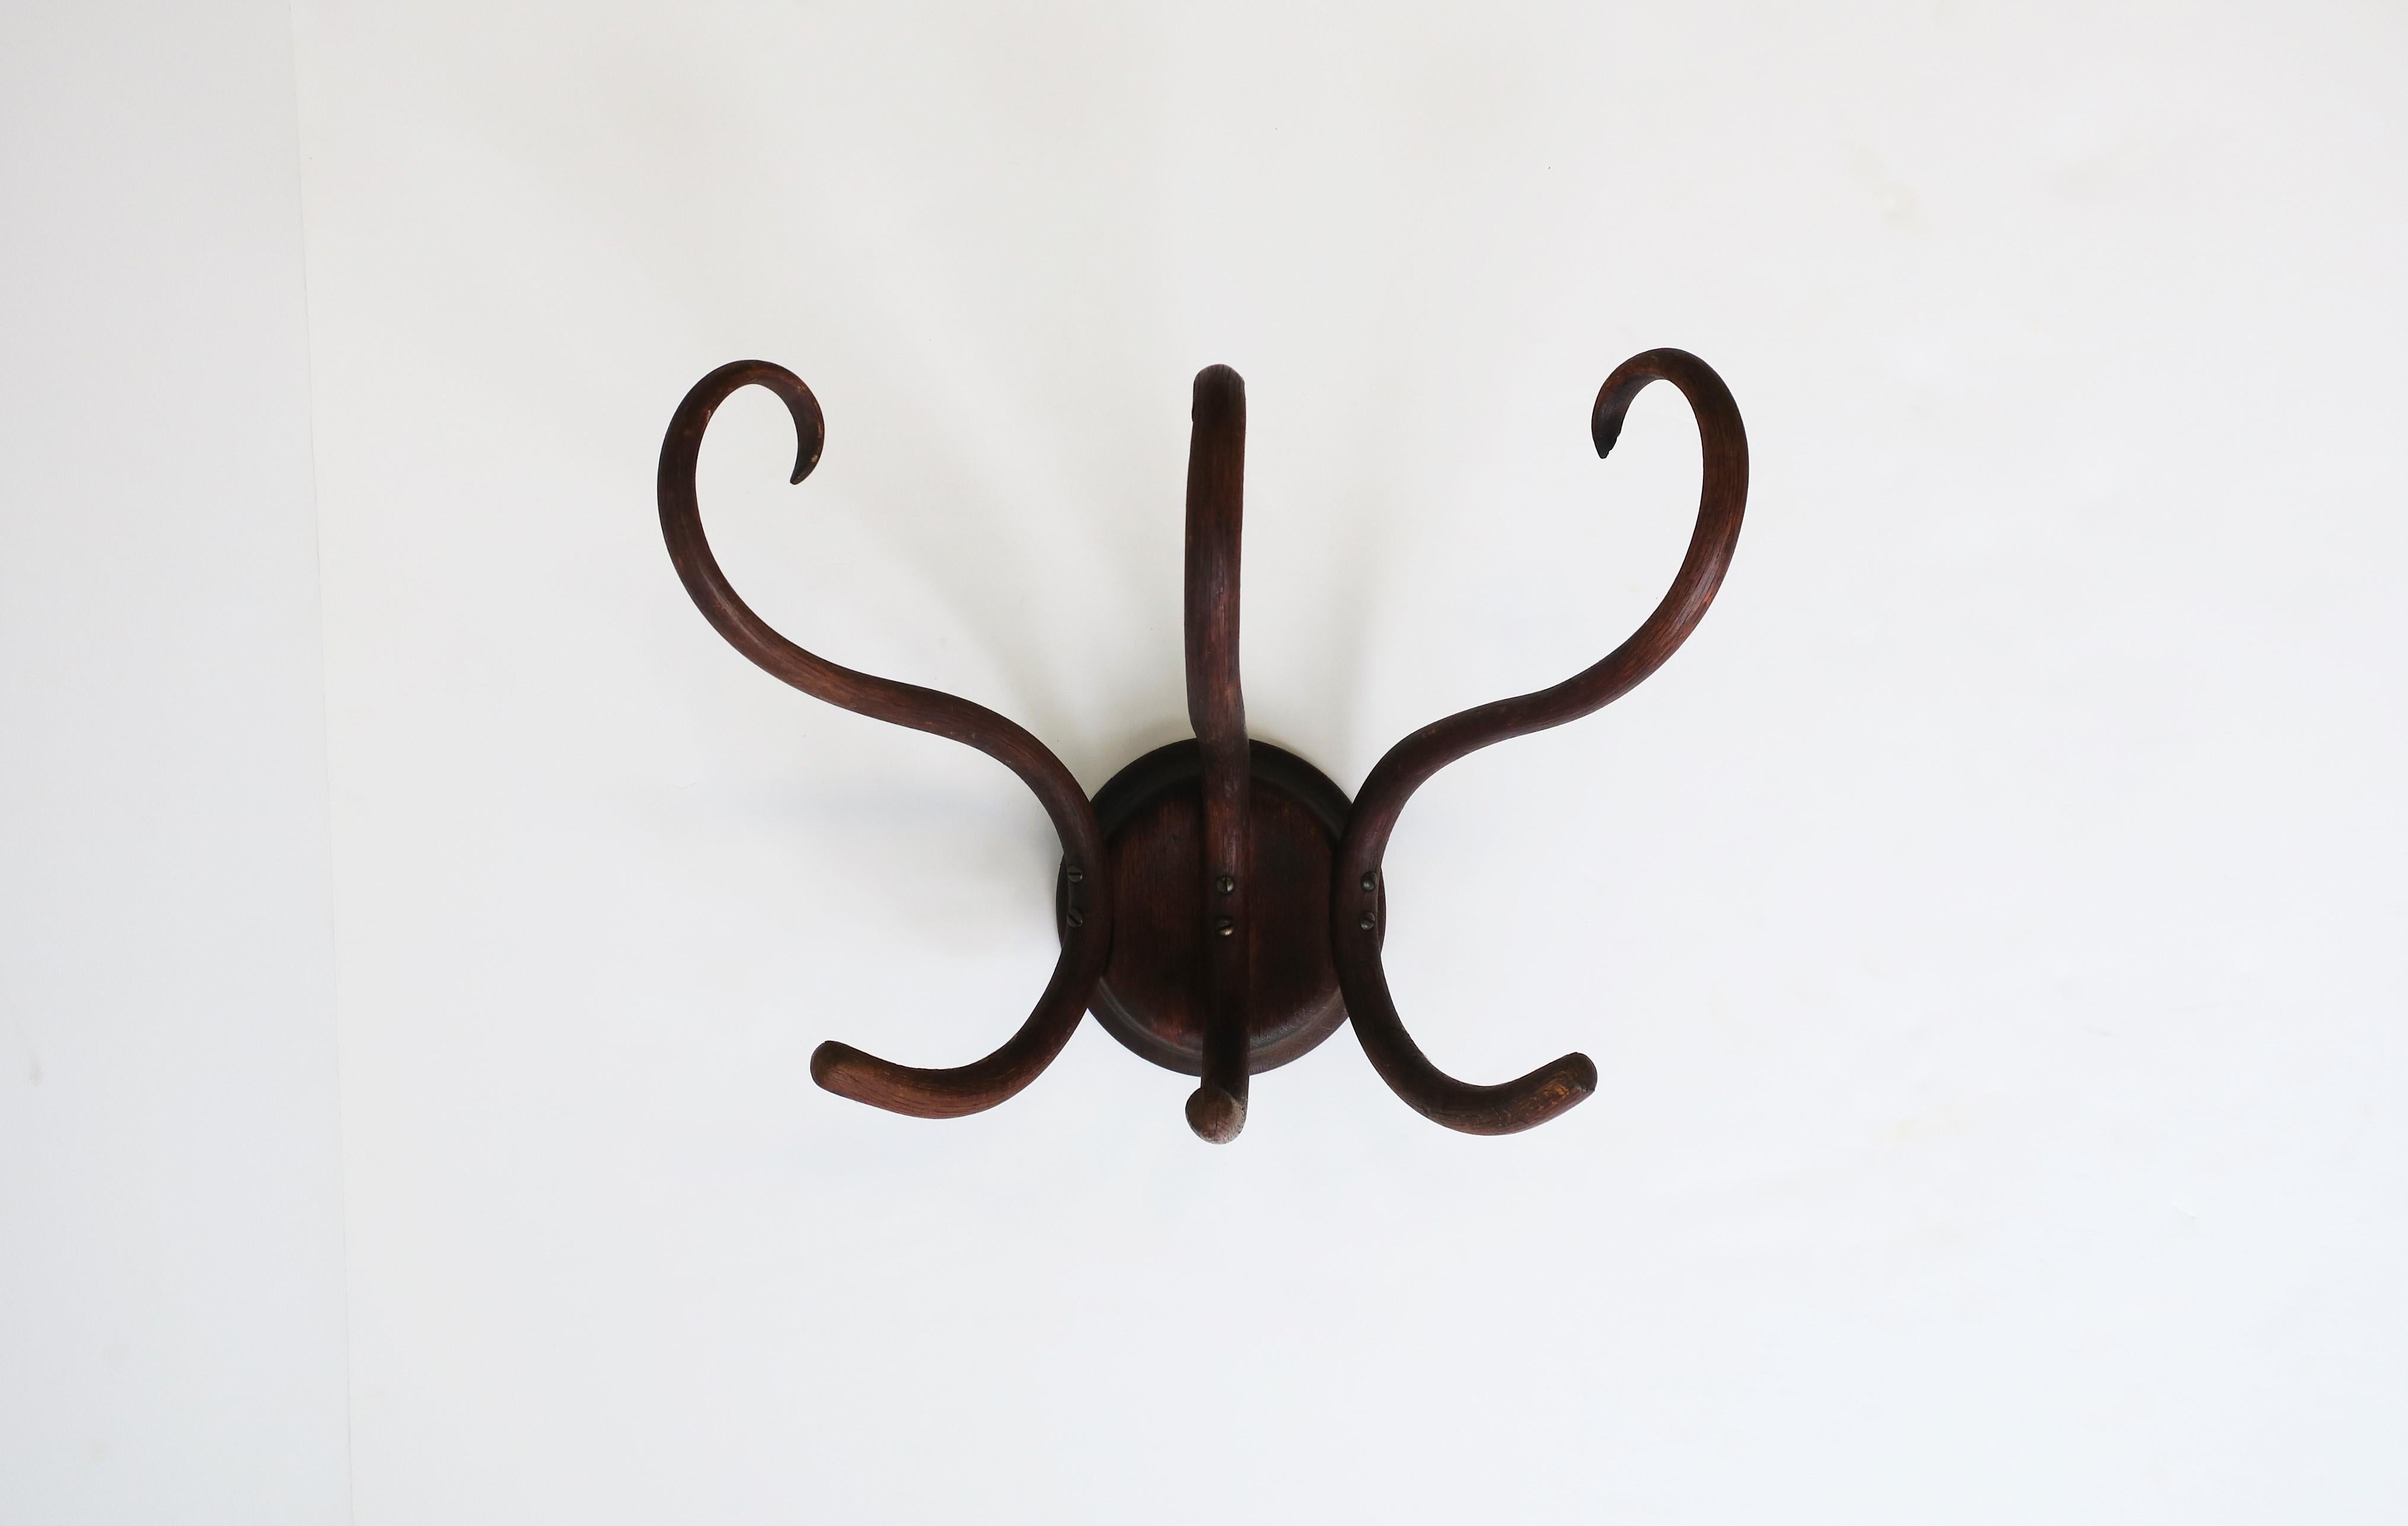 A beautiful vintage bentwood wall hall coat rack in the style of Thonet, circa early to mid-20th century. This wall coat rack has three hooks at top and three at bottom, so 6 hooks in total to hold coats, jackets, hats, umbrellas, etc. Piece is